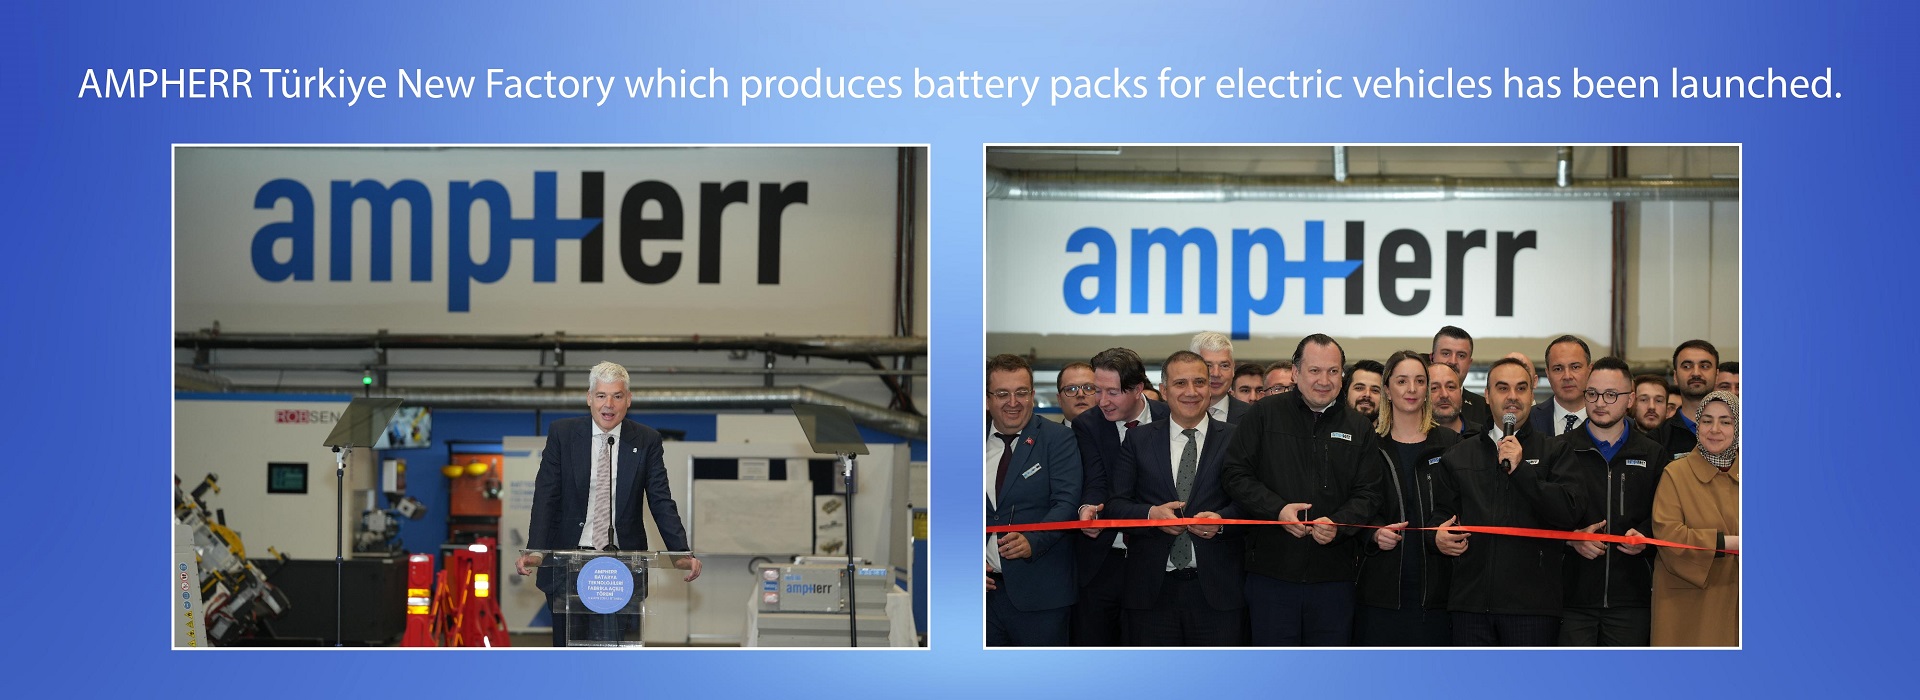 AMPHERR Türkiye New Factory which produces battery packs for electric vehicles has been launched.